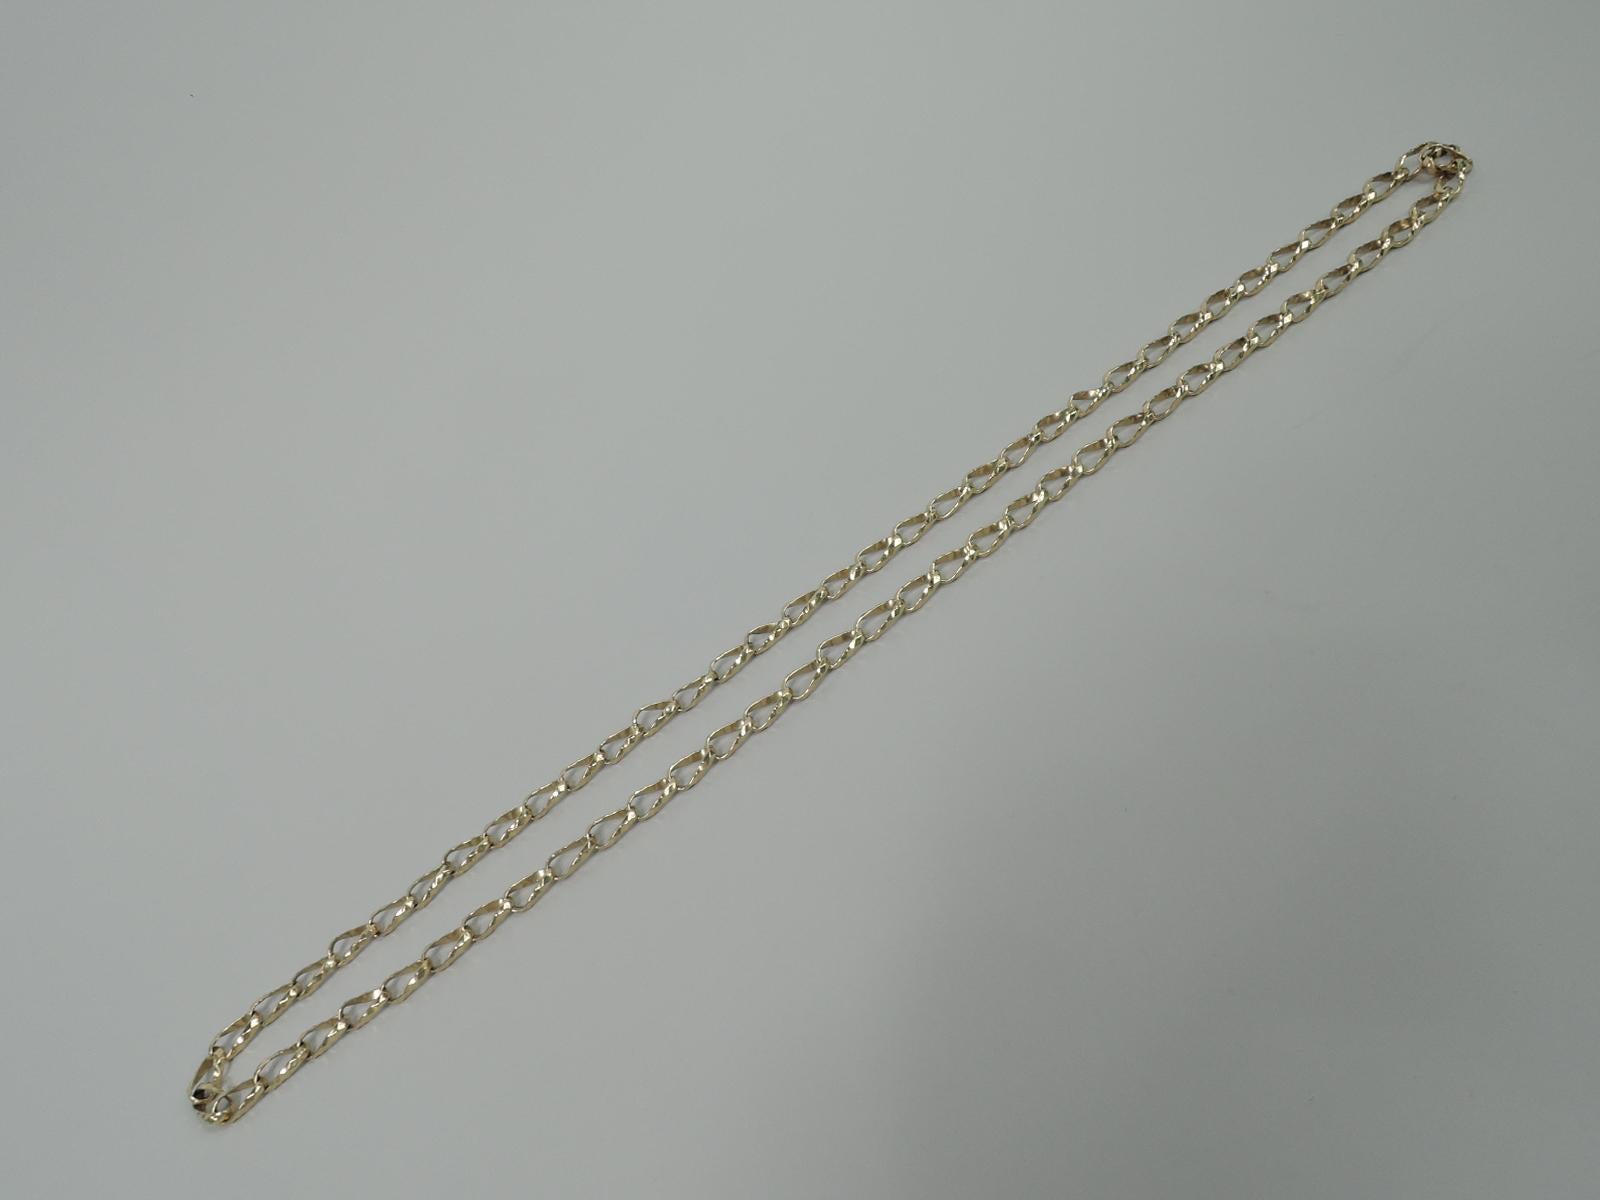 Unusual 14k gold chain necklace, comprising faceted oval links. No clasp. Custom made. United States, ca 1980s.